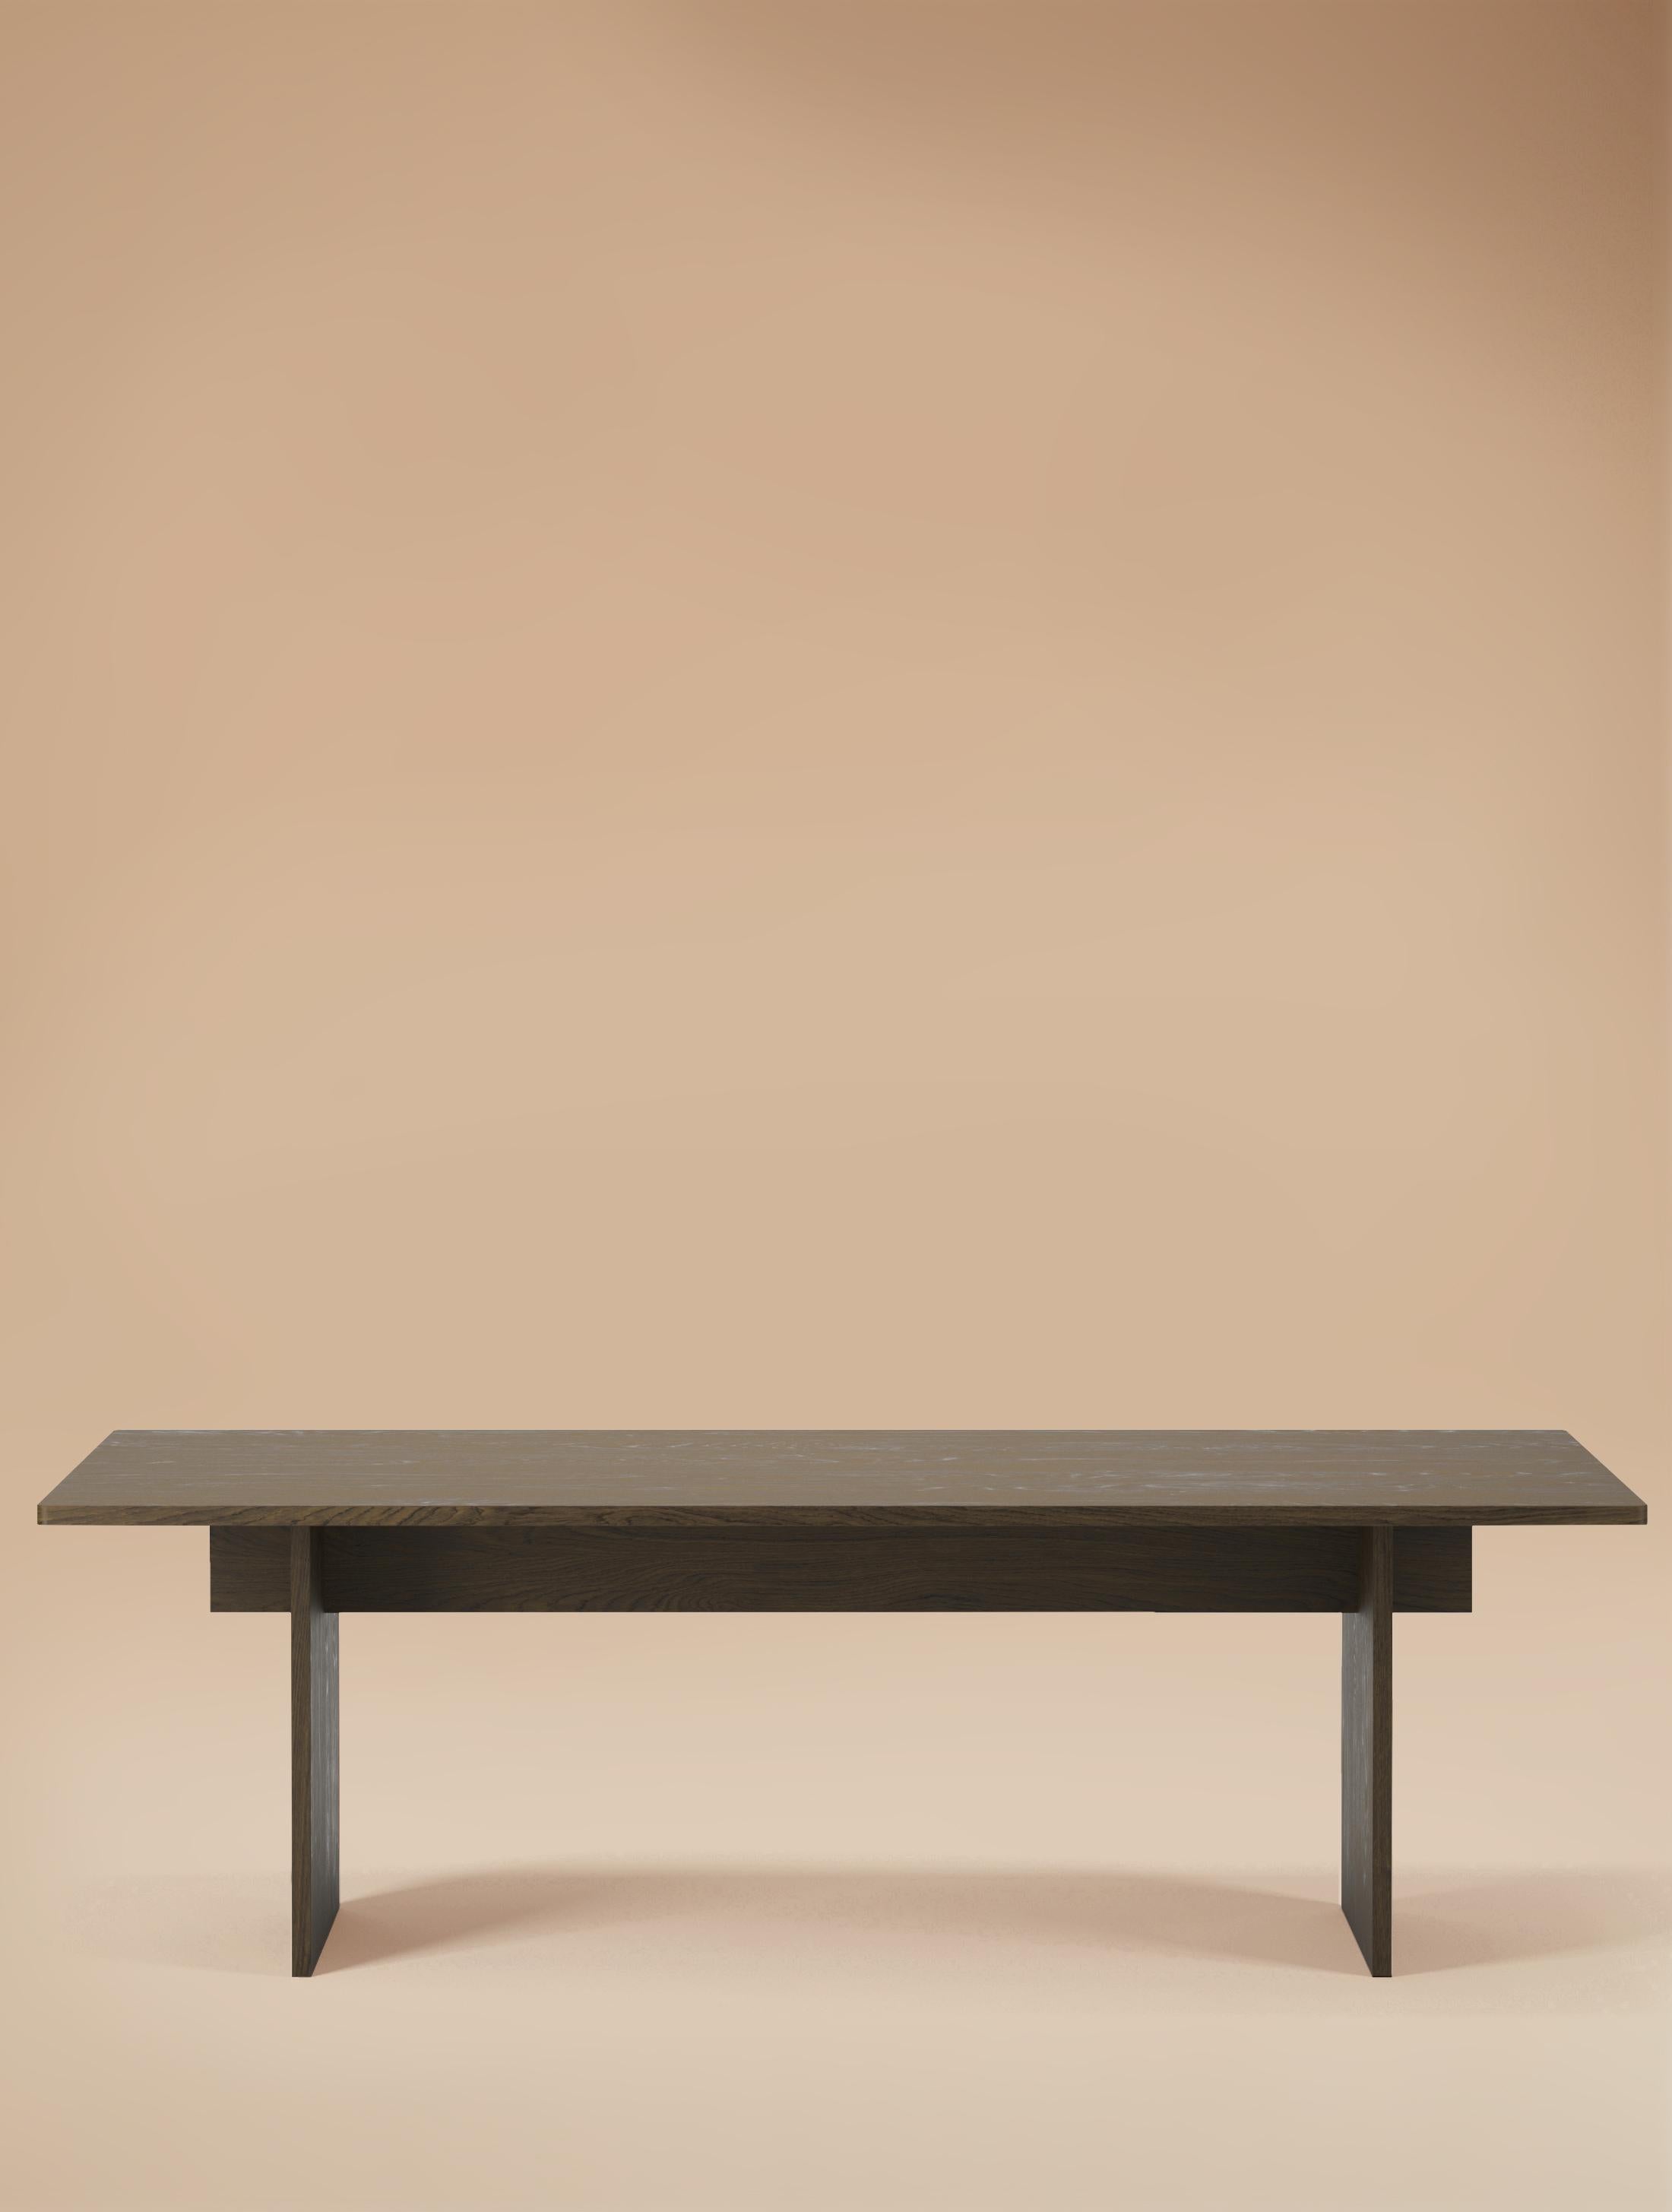 8 Seater Faure Table Handcrafted in Oak  by Kevin Frankental 11